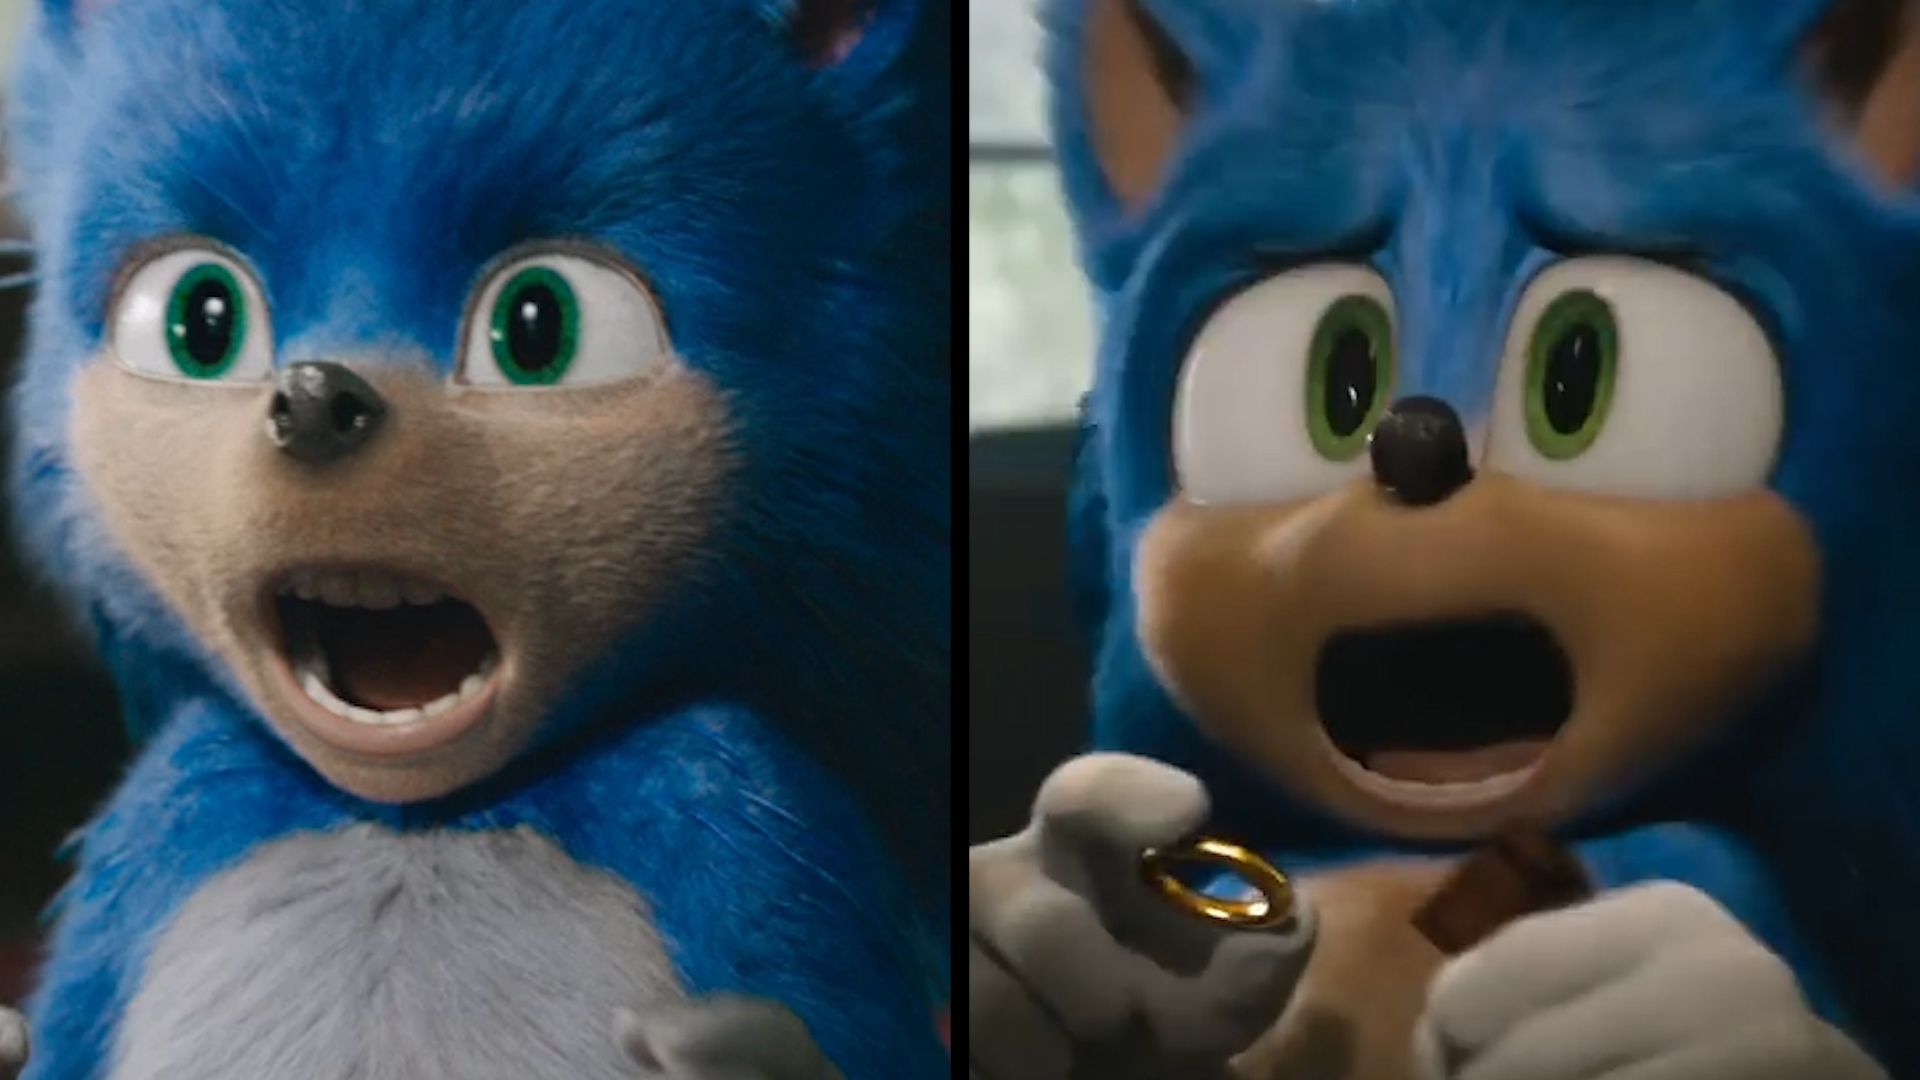 real life sonic the hedgehog movie